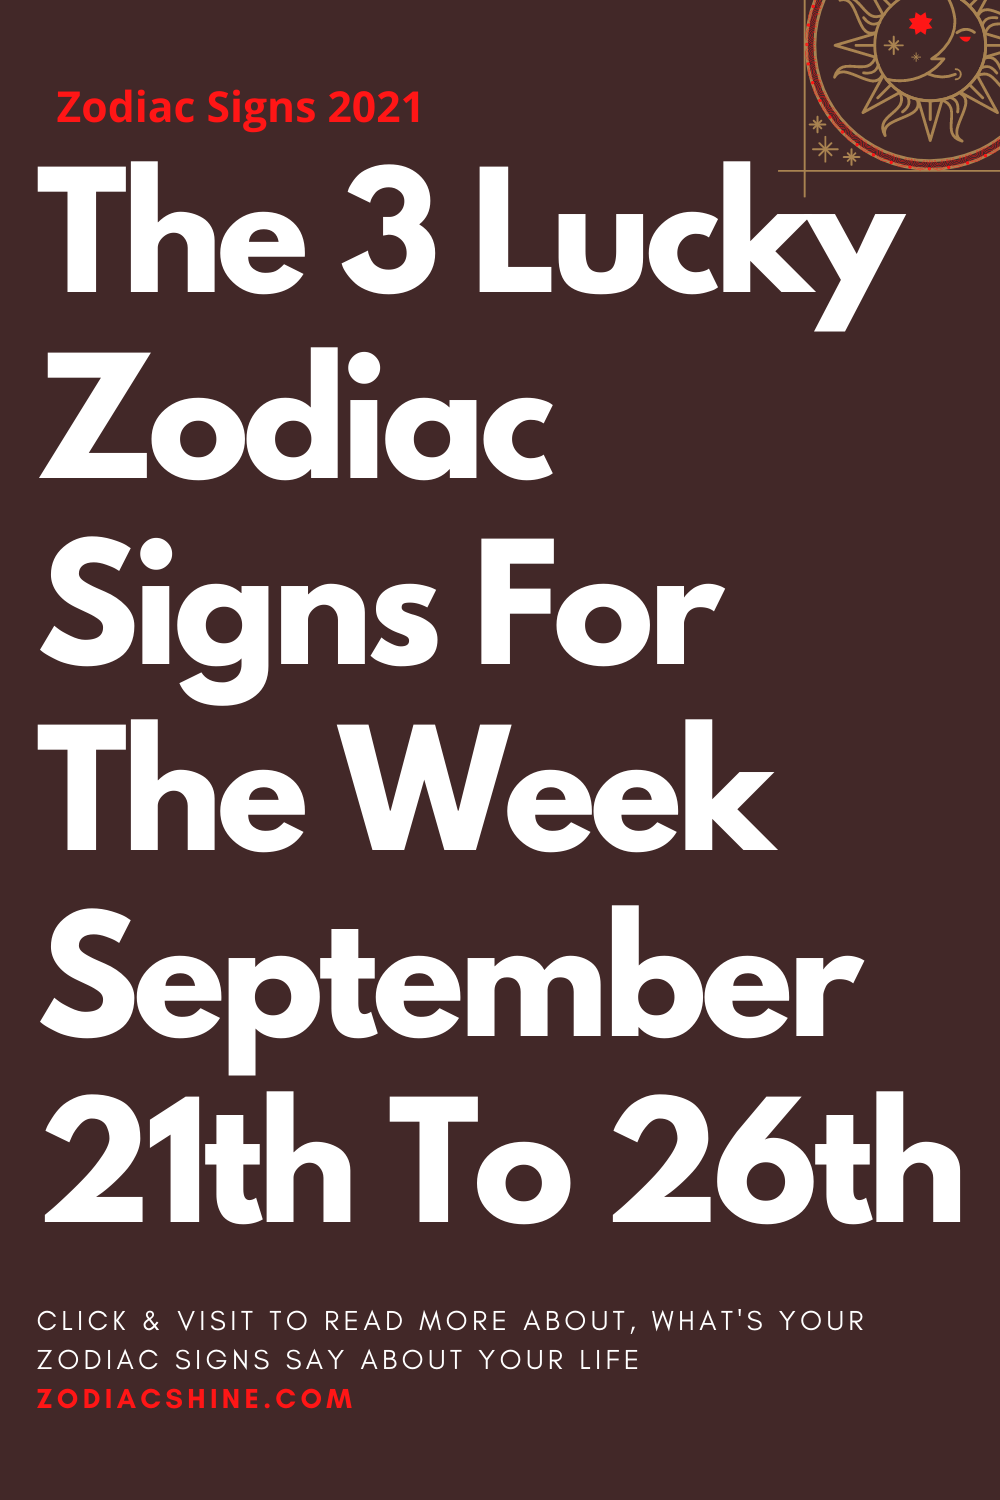 The 3 Lucky Zodiac Signs For The Week September 21th To 26th